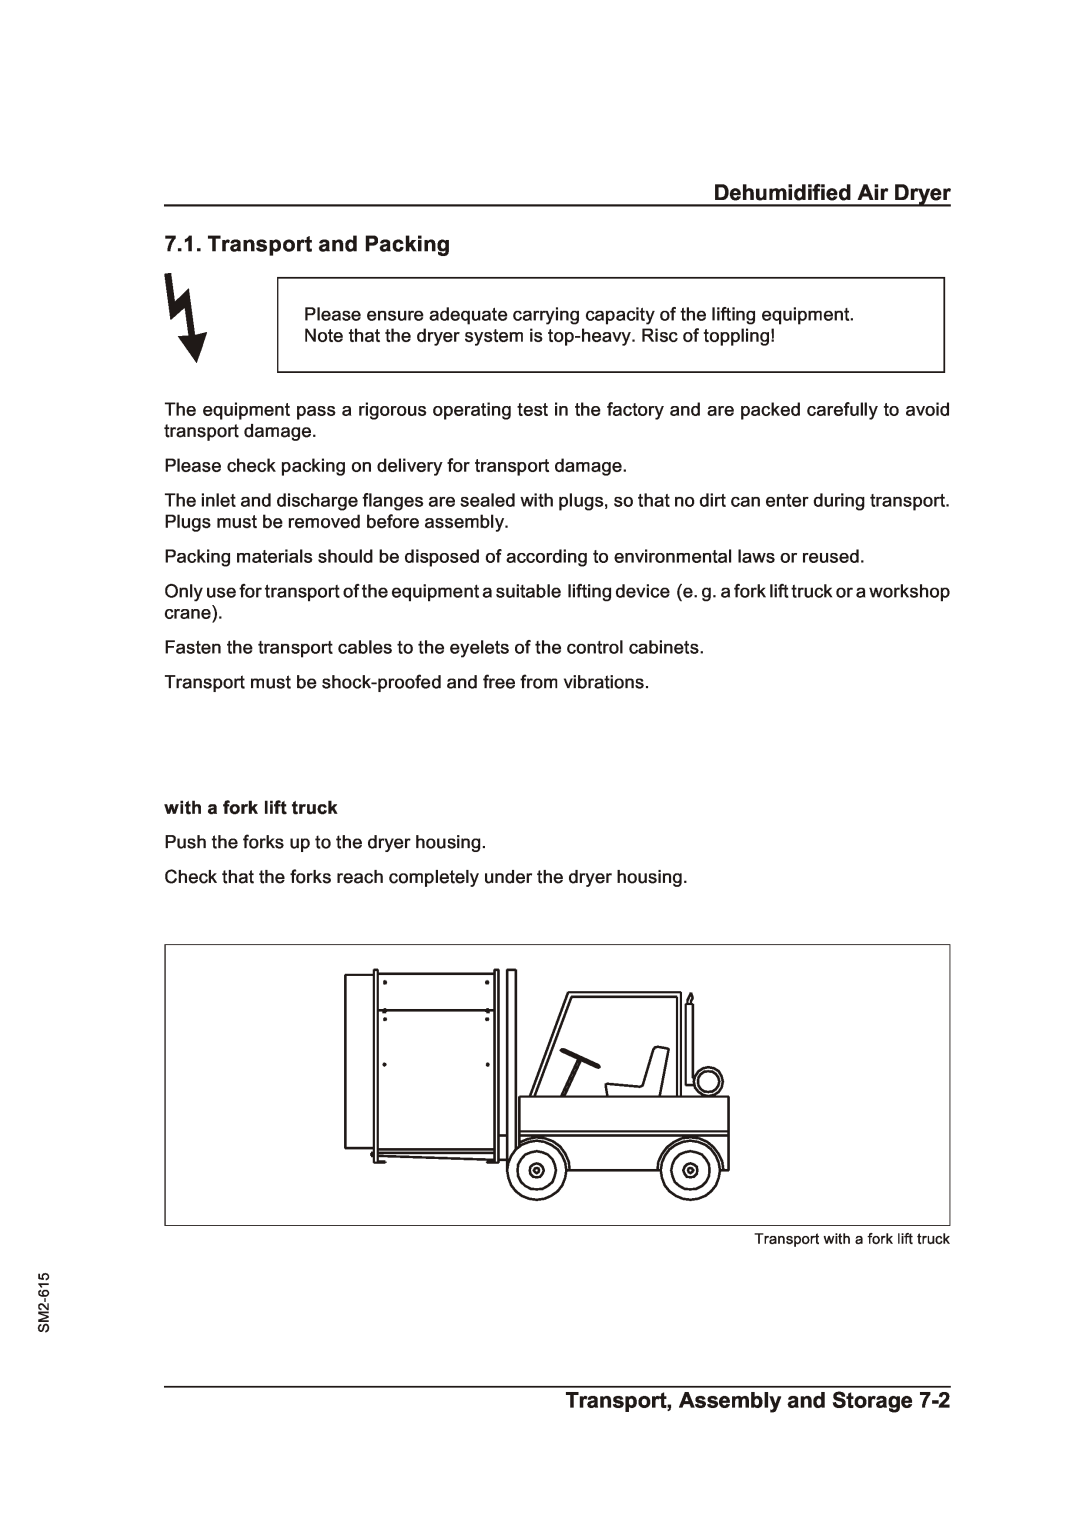 Sterling STT 300 operating instructions Dehumidified Air Dryer 7.1. Transport and Packing, Transport, Assembly and Storage 